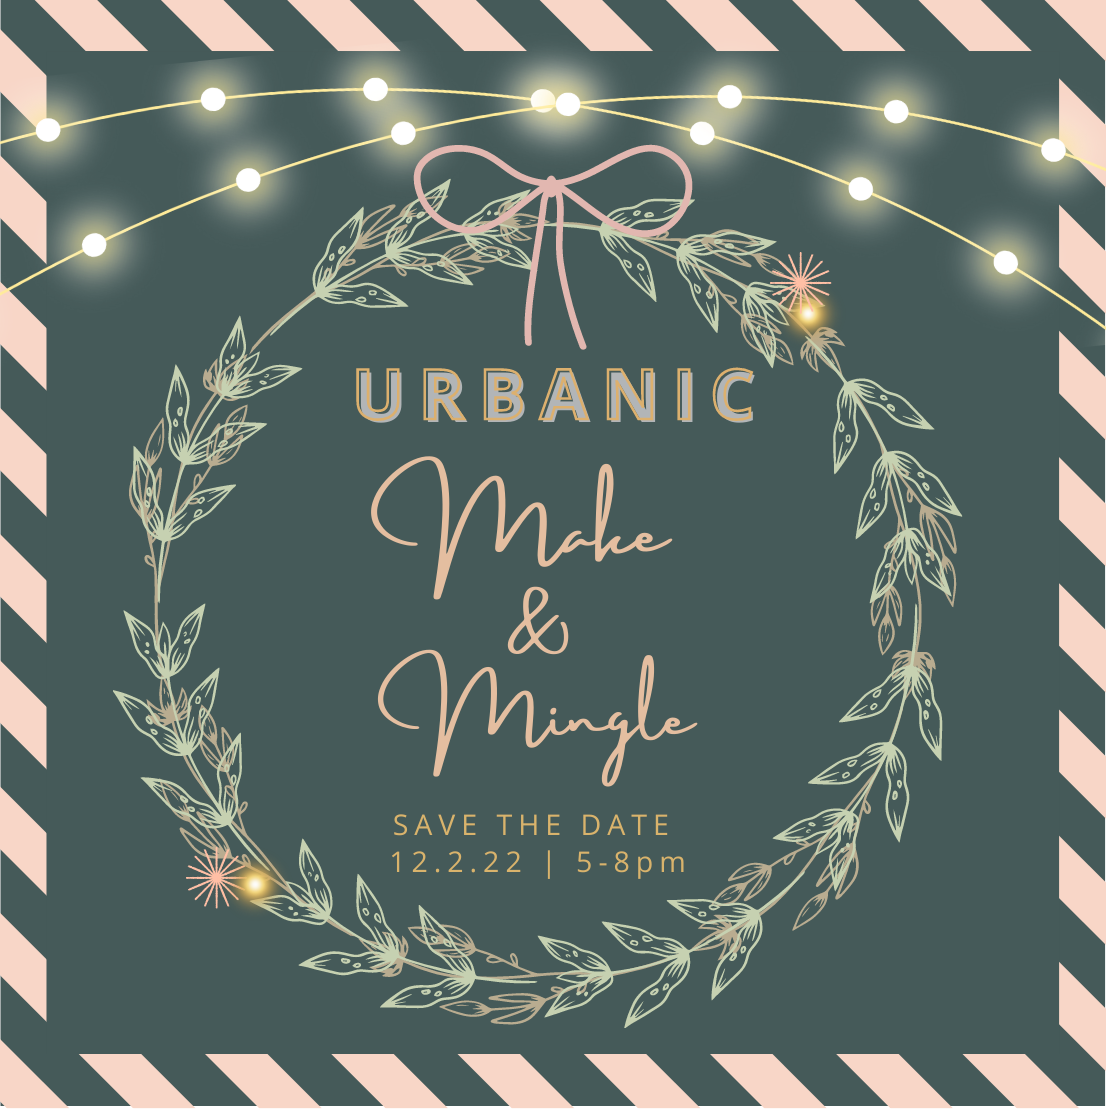 urbanic paper boutique los angeles make and mingle holiday party mixer save the date